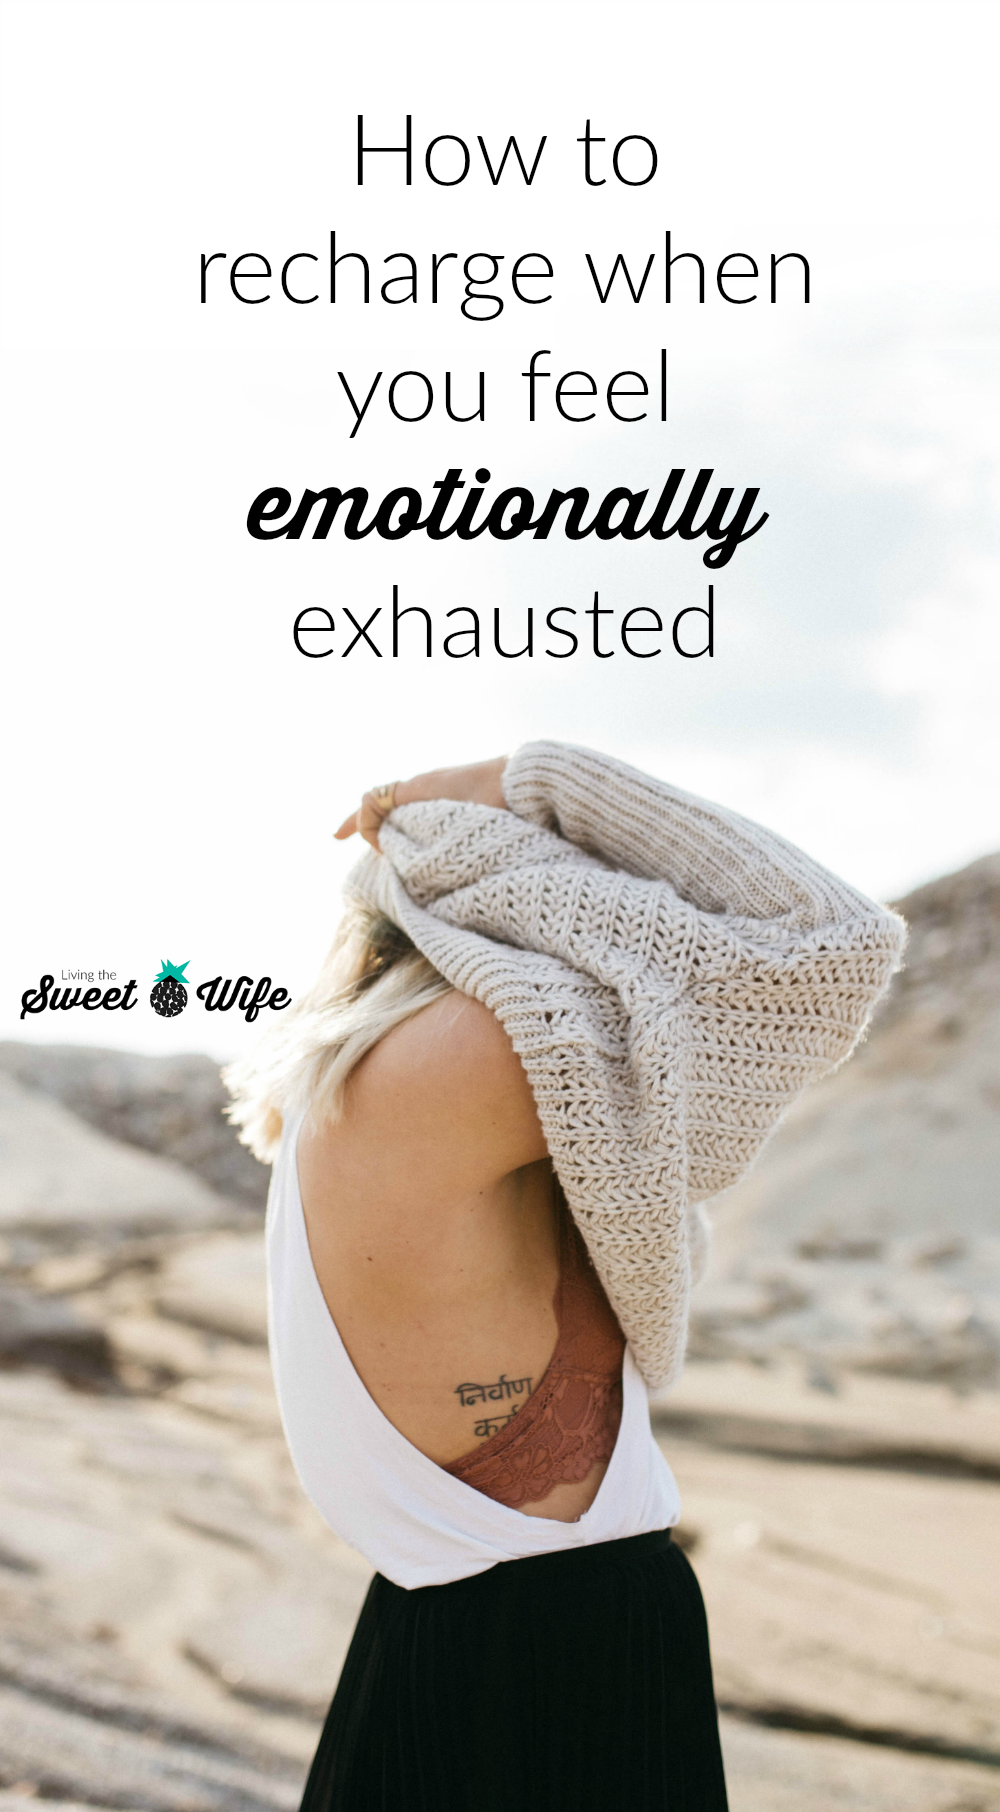 Have you ever been to the point of emotional exhaustion where you literally stop feeling feelings for a while? Whether voluntary or not, the numbness of emotional exhaustion is not fun- or healthy- for long periods of time. Here are some tips I’ve compiled to help you get a head start back to an emotionally healthy, energized, and renewed state.